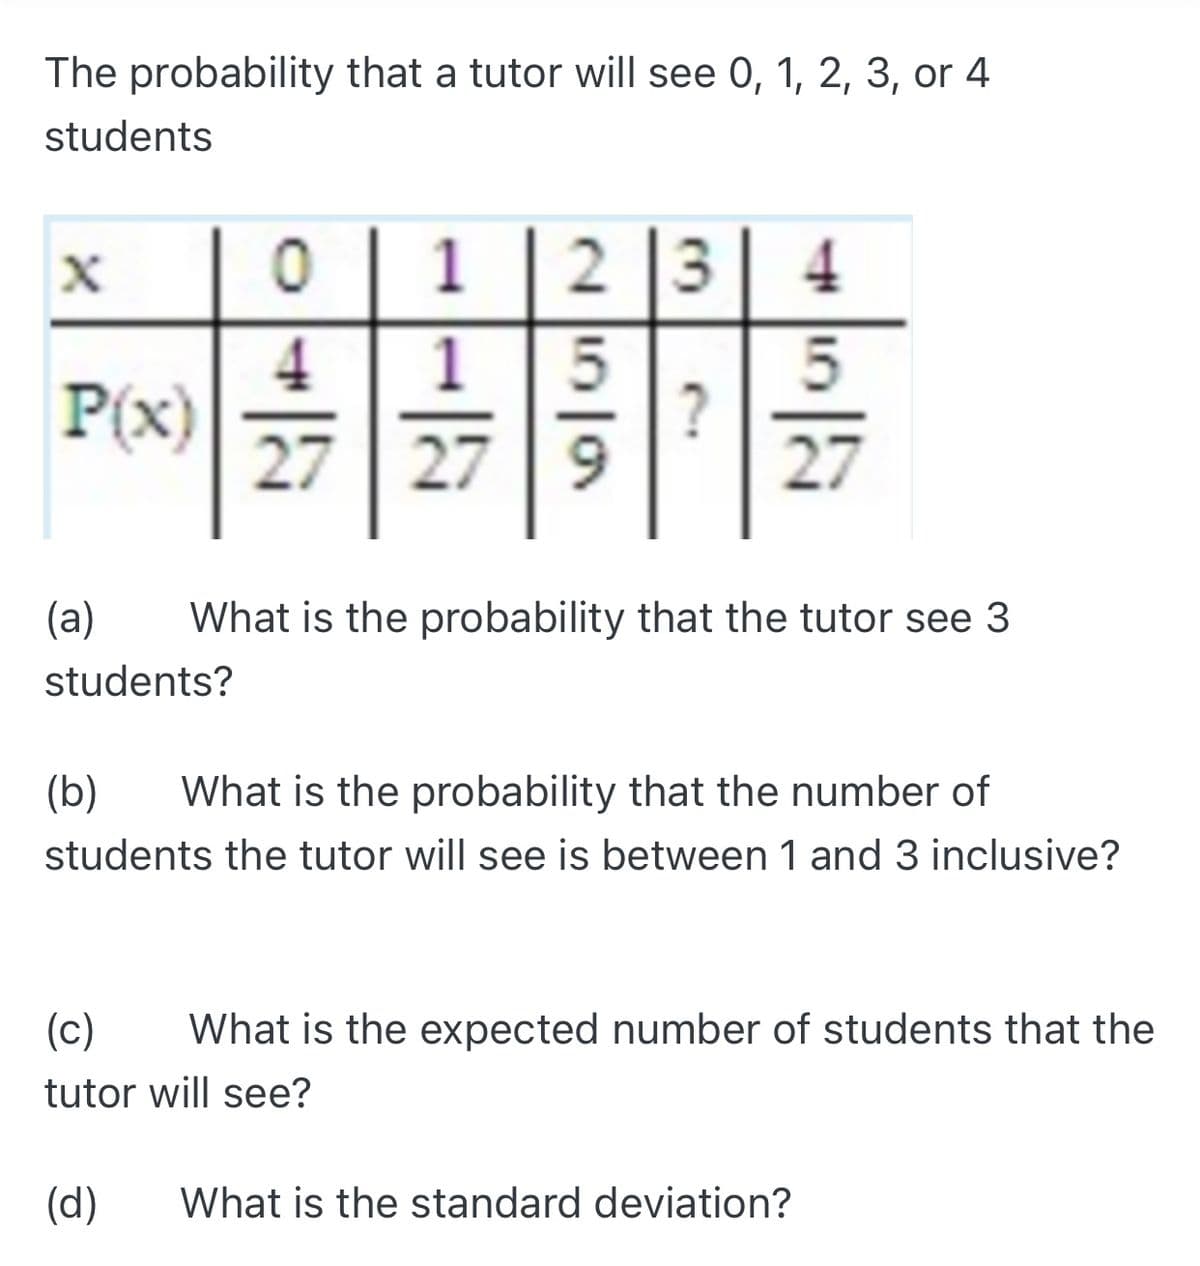 The probability that a tutor will see 0, 1, 2, 3, or 4
students
2 |3
1
1
4
P(x)
27
?
27
27 9
(a)
What is the probability that the tutor see 3
students?
(b)
What is the probability that the number of
students the tutor will see is between 1 and 3 inclusive?
(c)
What is the expected number of students that the
tutor will see?
(d)
What is the standard deviation?
